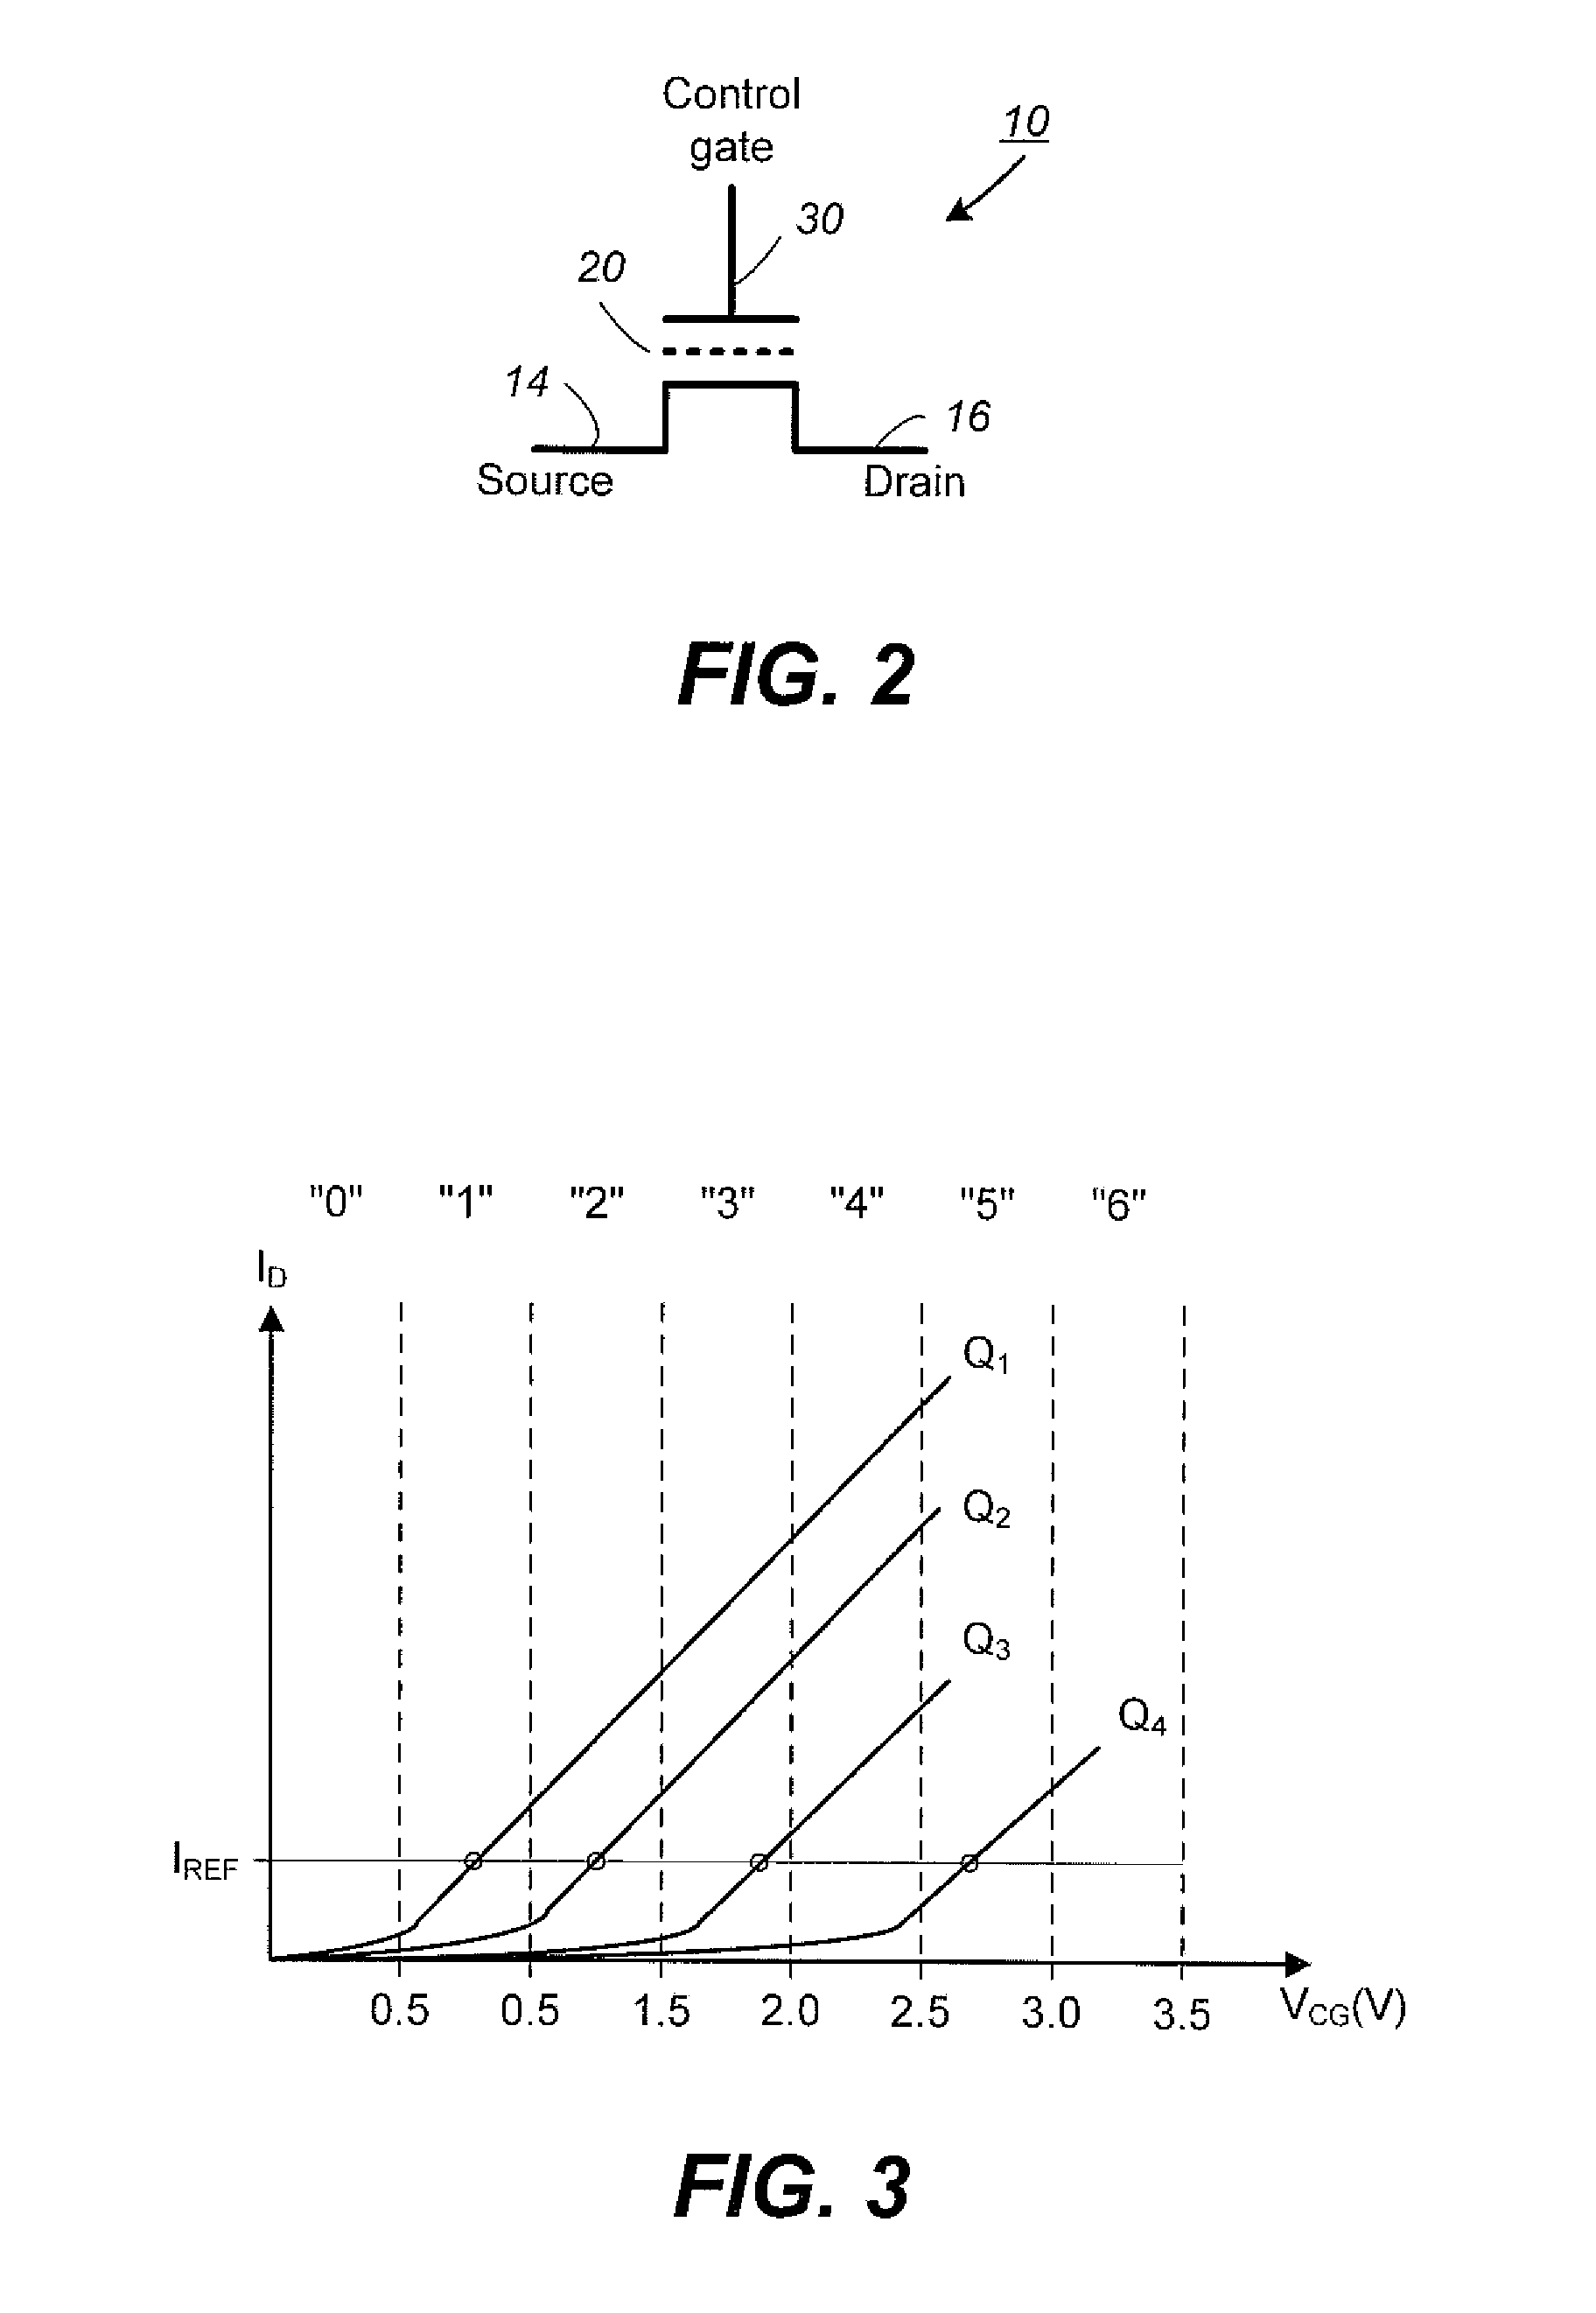 Nonvolatile Memory And Method With Reduced Program Verify By Ignoring Fastest And/Or Slowest Programming Bits